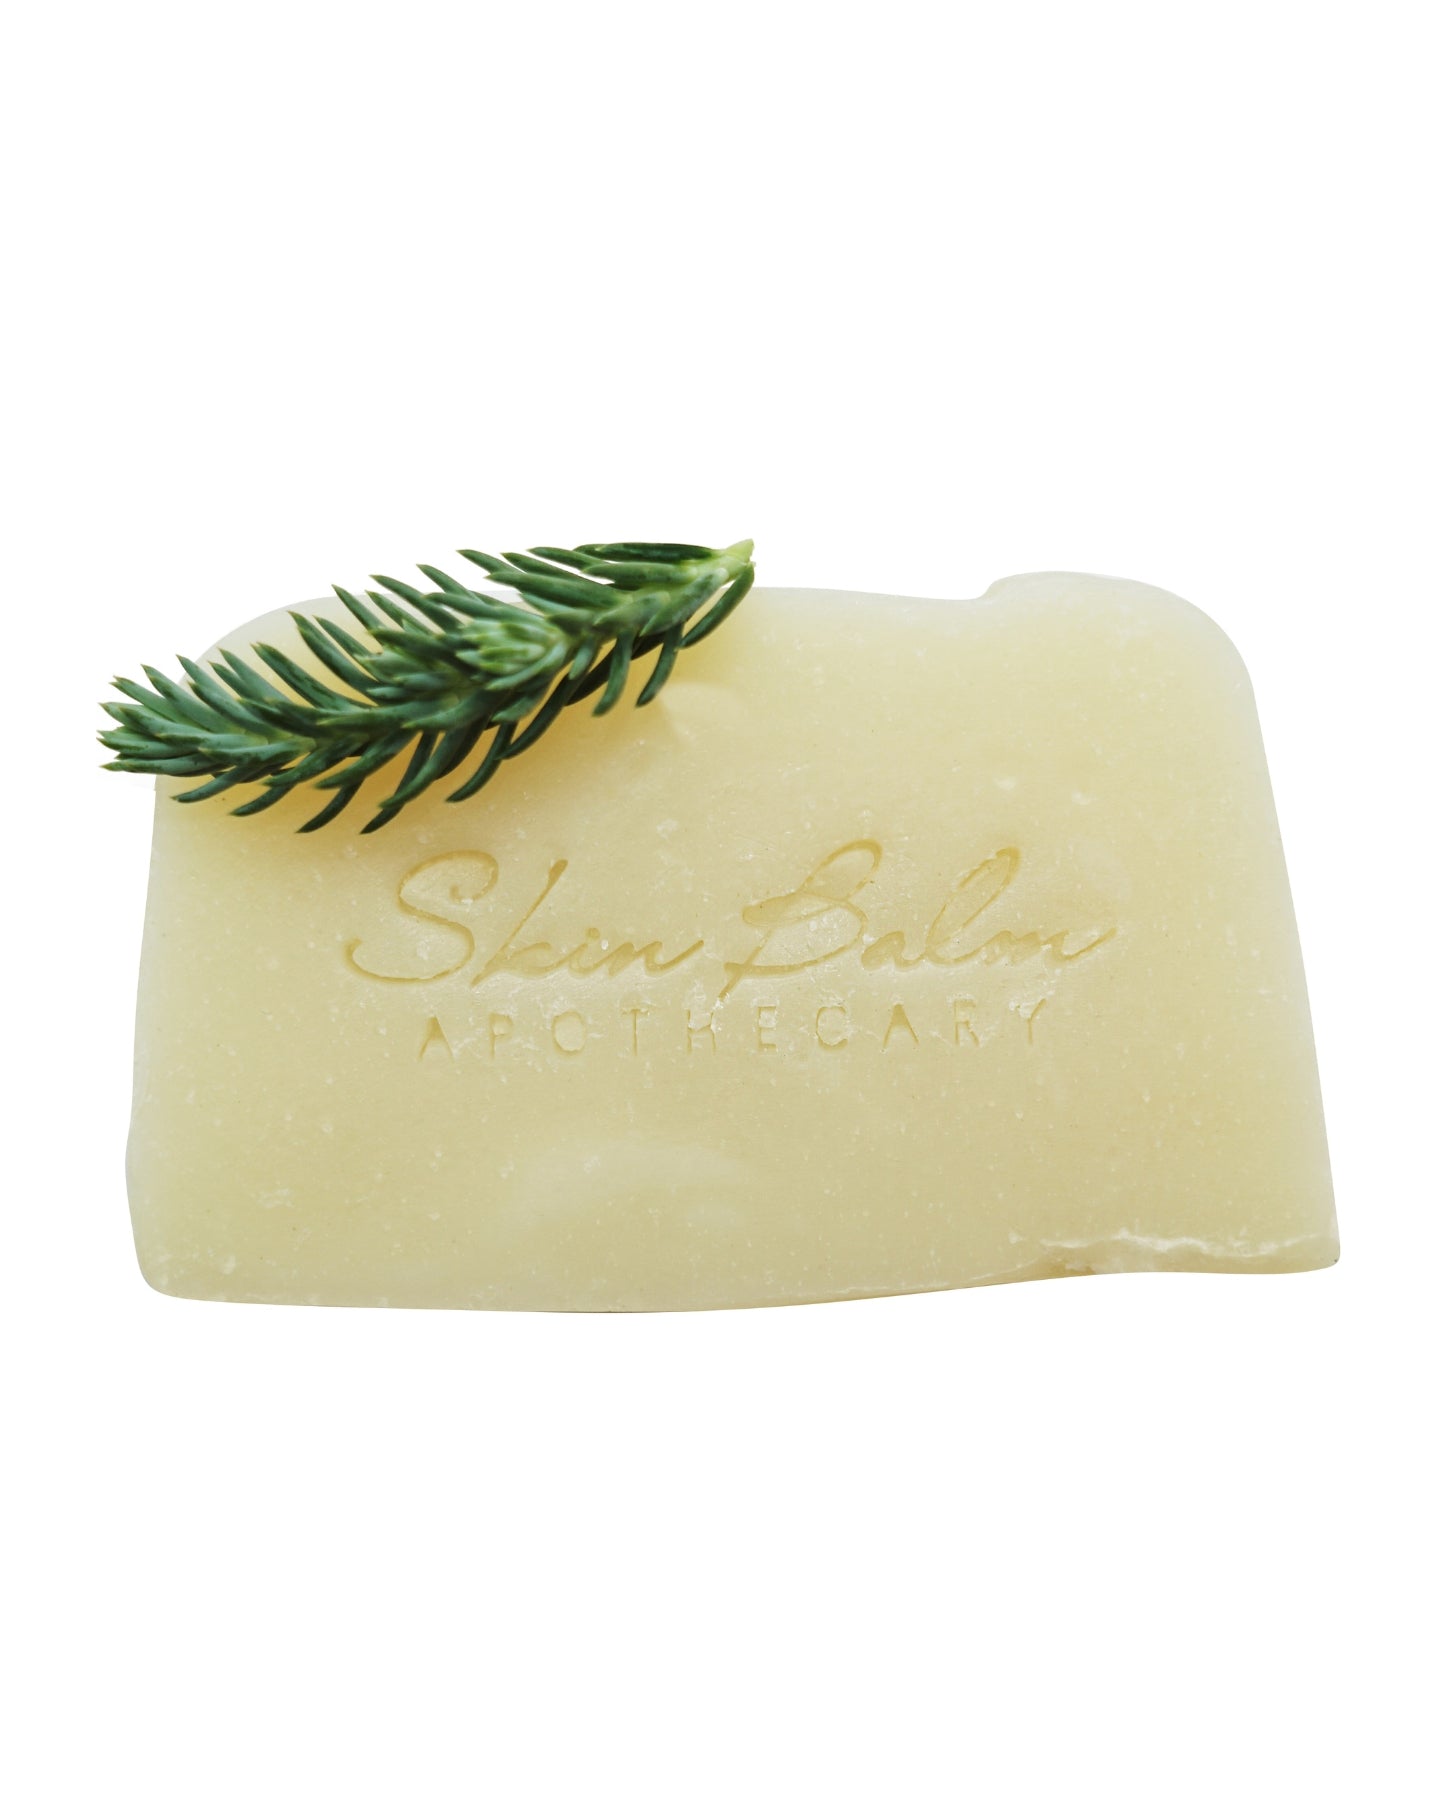 Nourish Shampoo Bar with an evergreen stem against a white background.